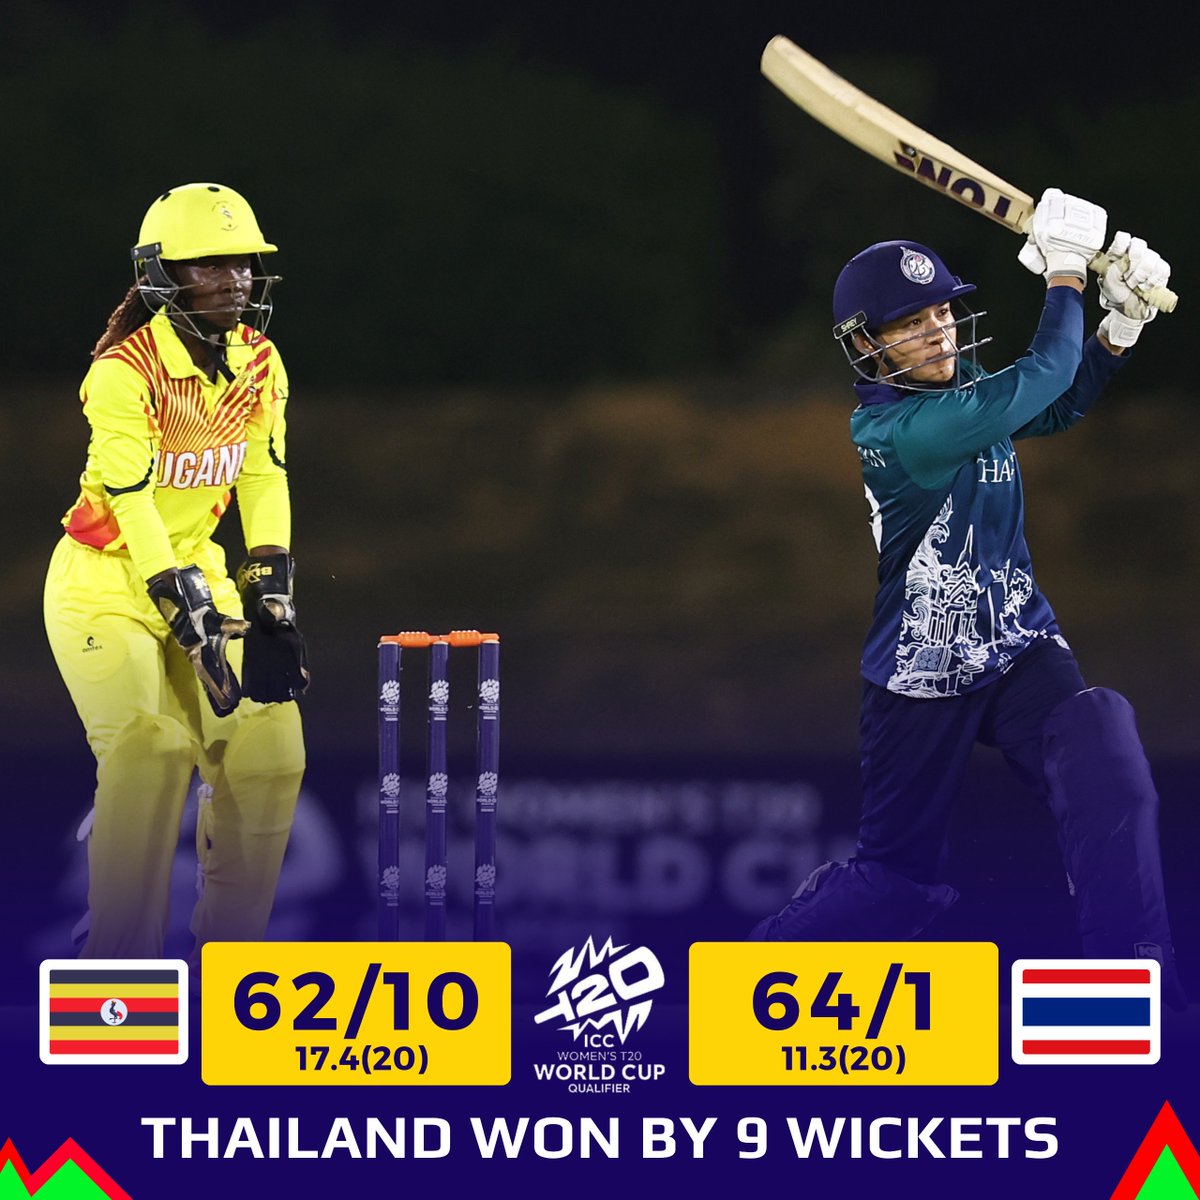 Ends in Defeat for the Victoria Pearls in their 3rd game of the tournament. The final group game is against Sri Lanka on 01/05/2024. #CricketUganda